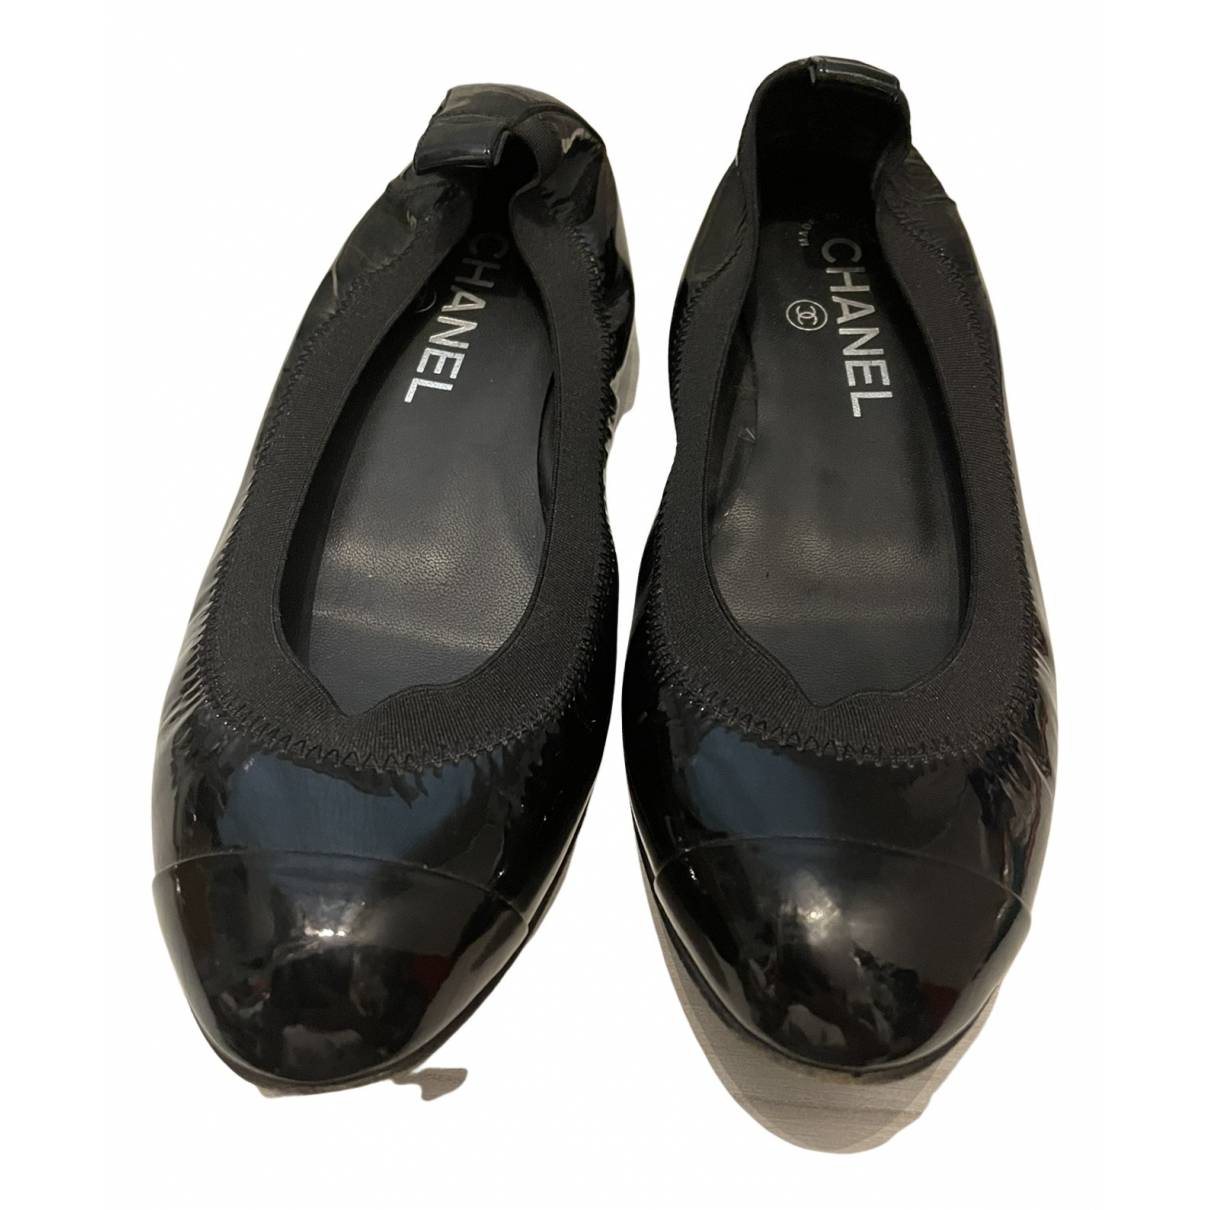 Patent leather ballet flats Chanel Black size 36 EU in Patent